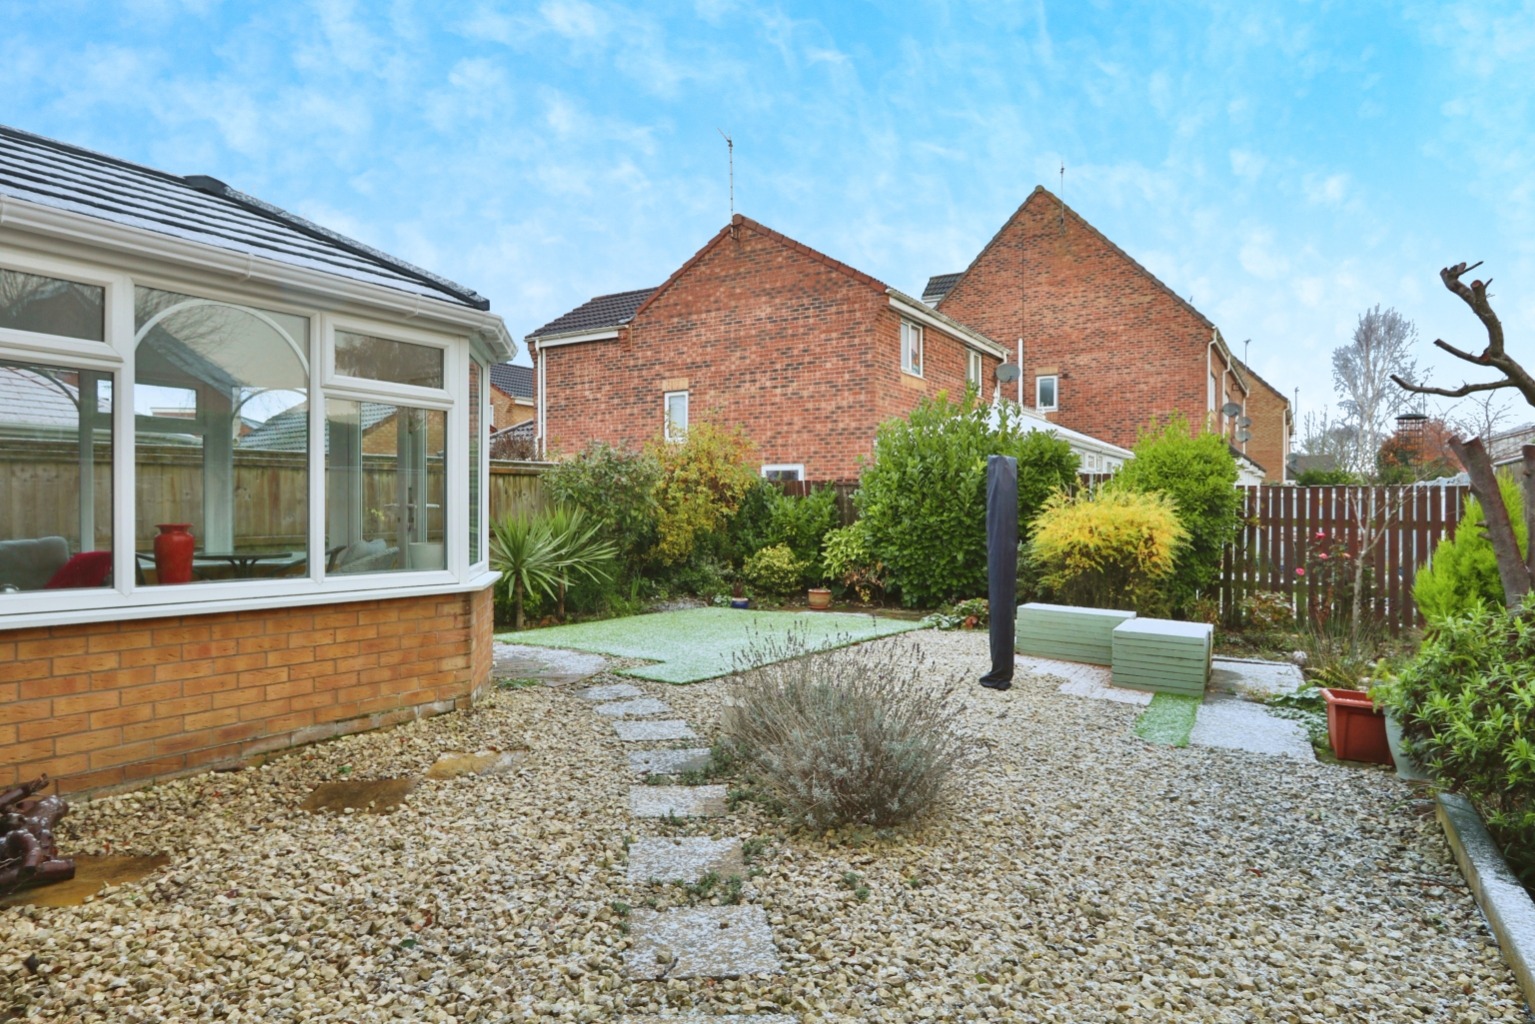 3 bed detached house for sale in Mill View Road, Beverley  - Property Image 18